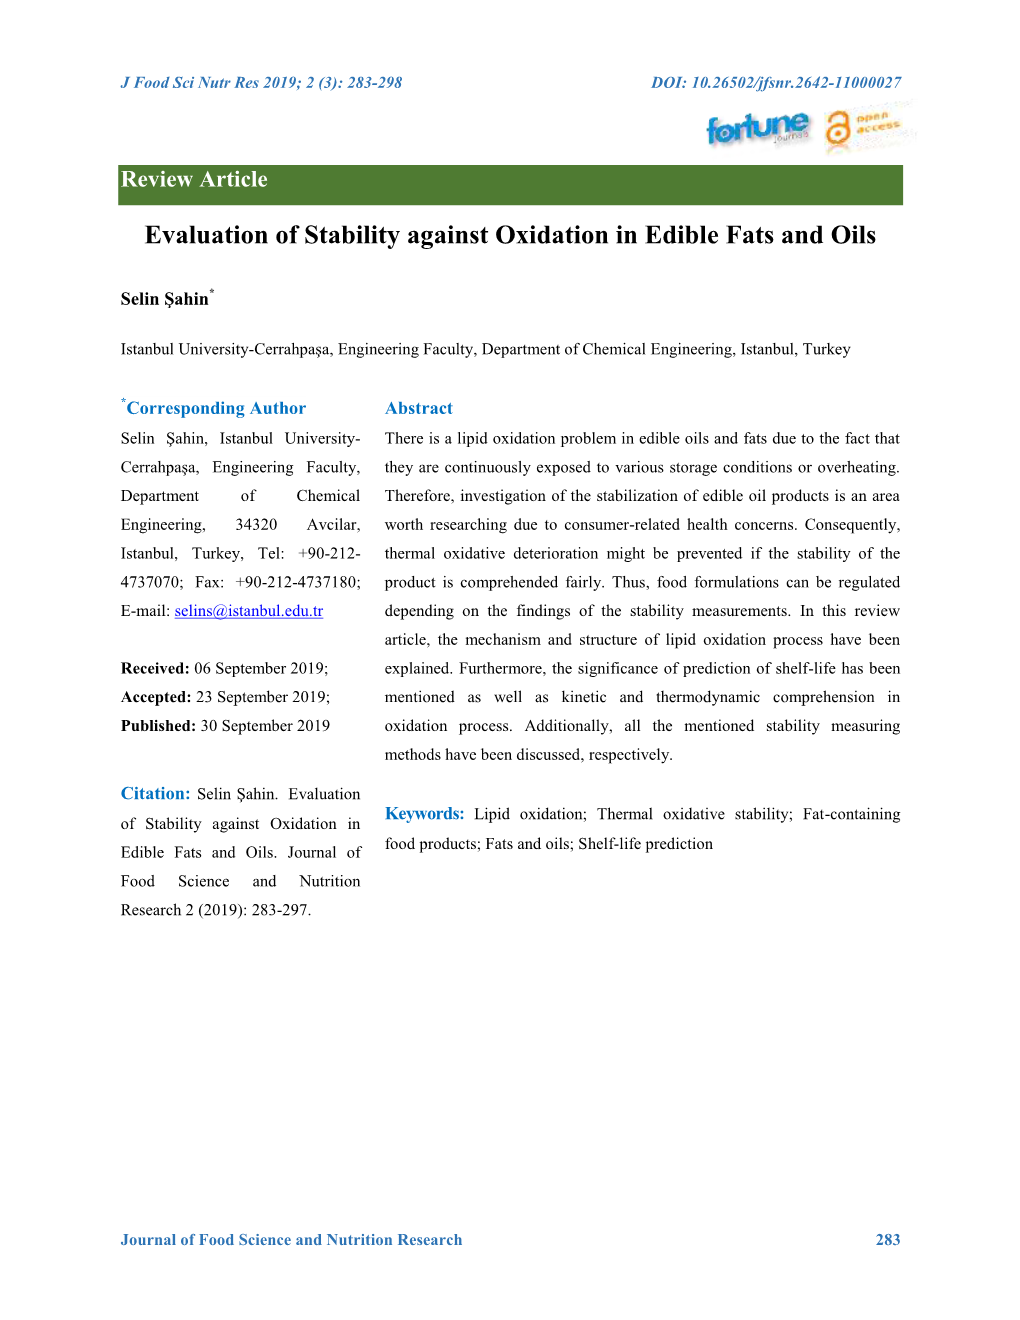 Evaluation of Stability Against Oxidation in Edible Fats and Oils